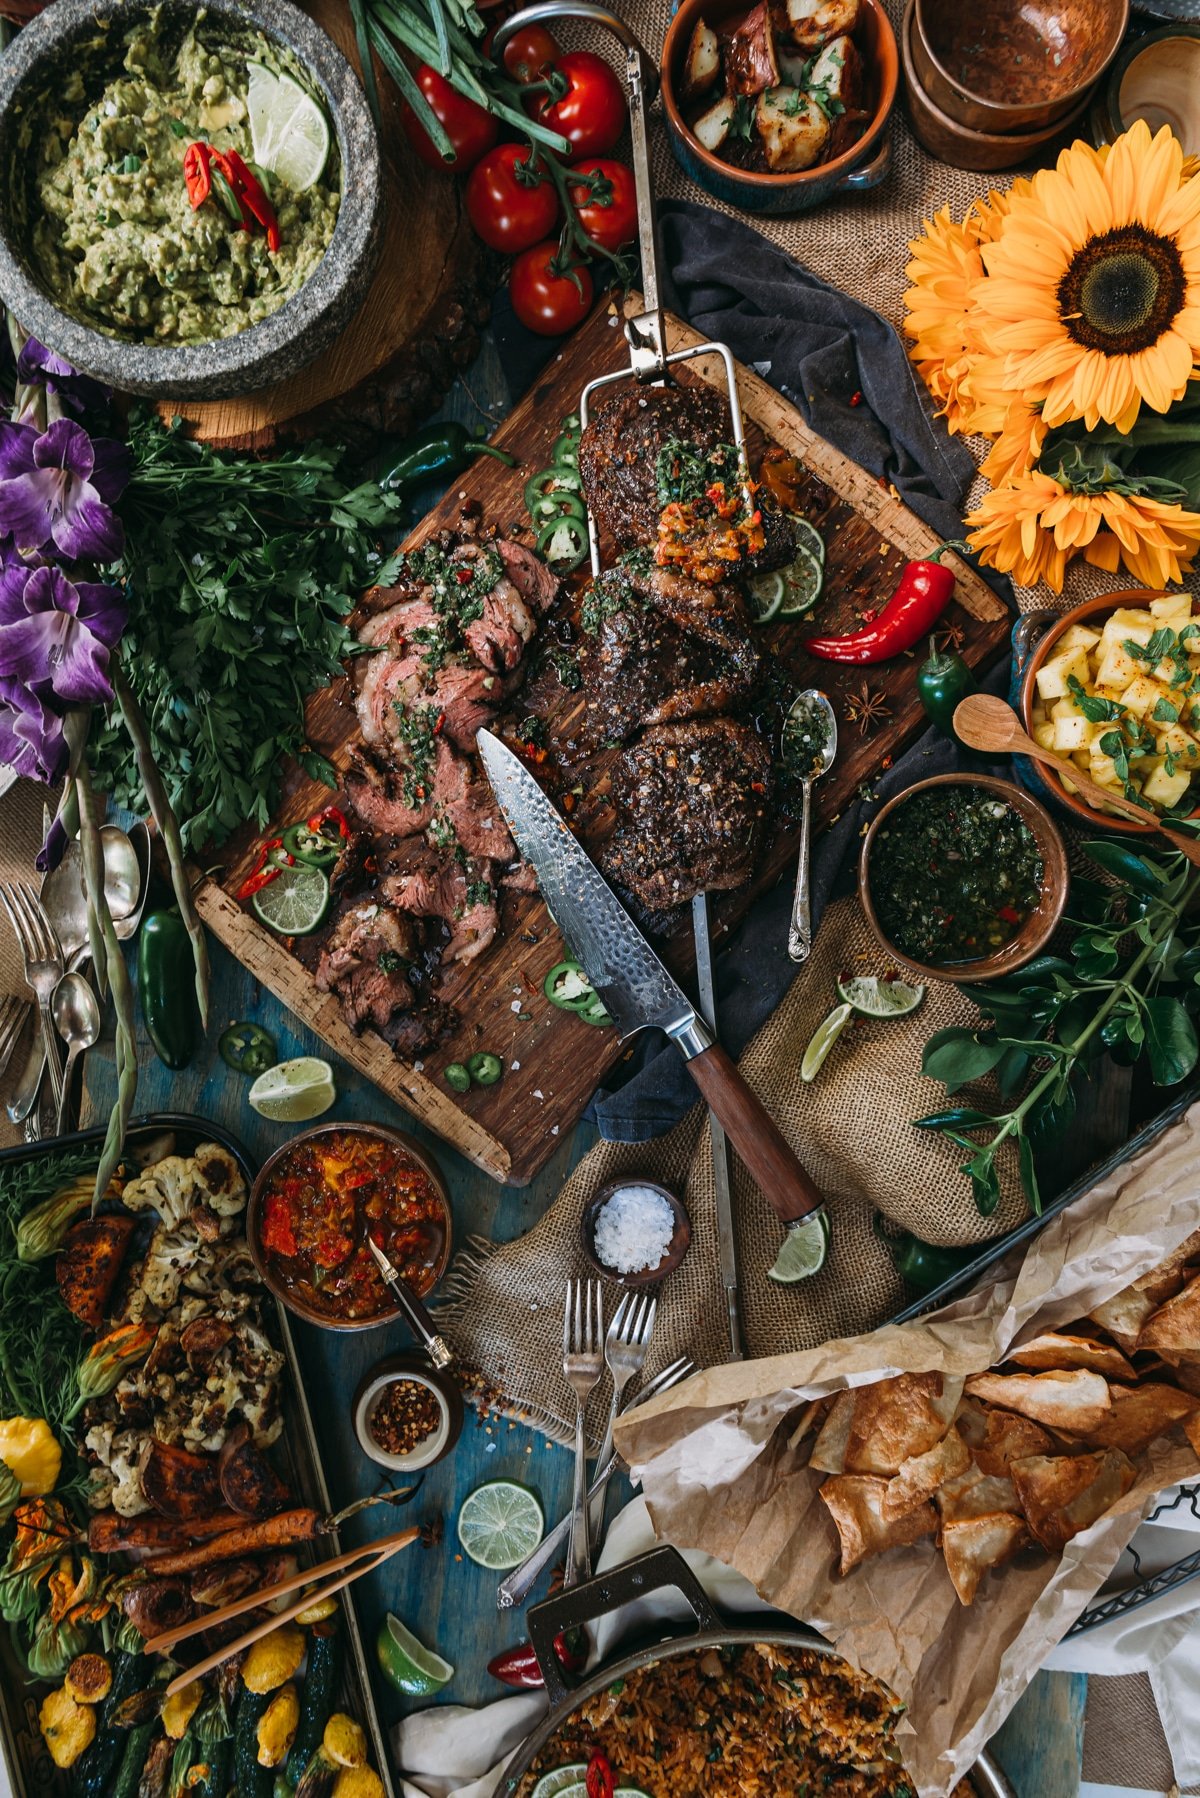 gas grilled picanha being sliced - shown from above on a table filled with guacamole, flowers, peppers, tortilla chips and more